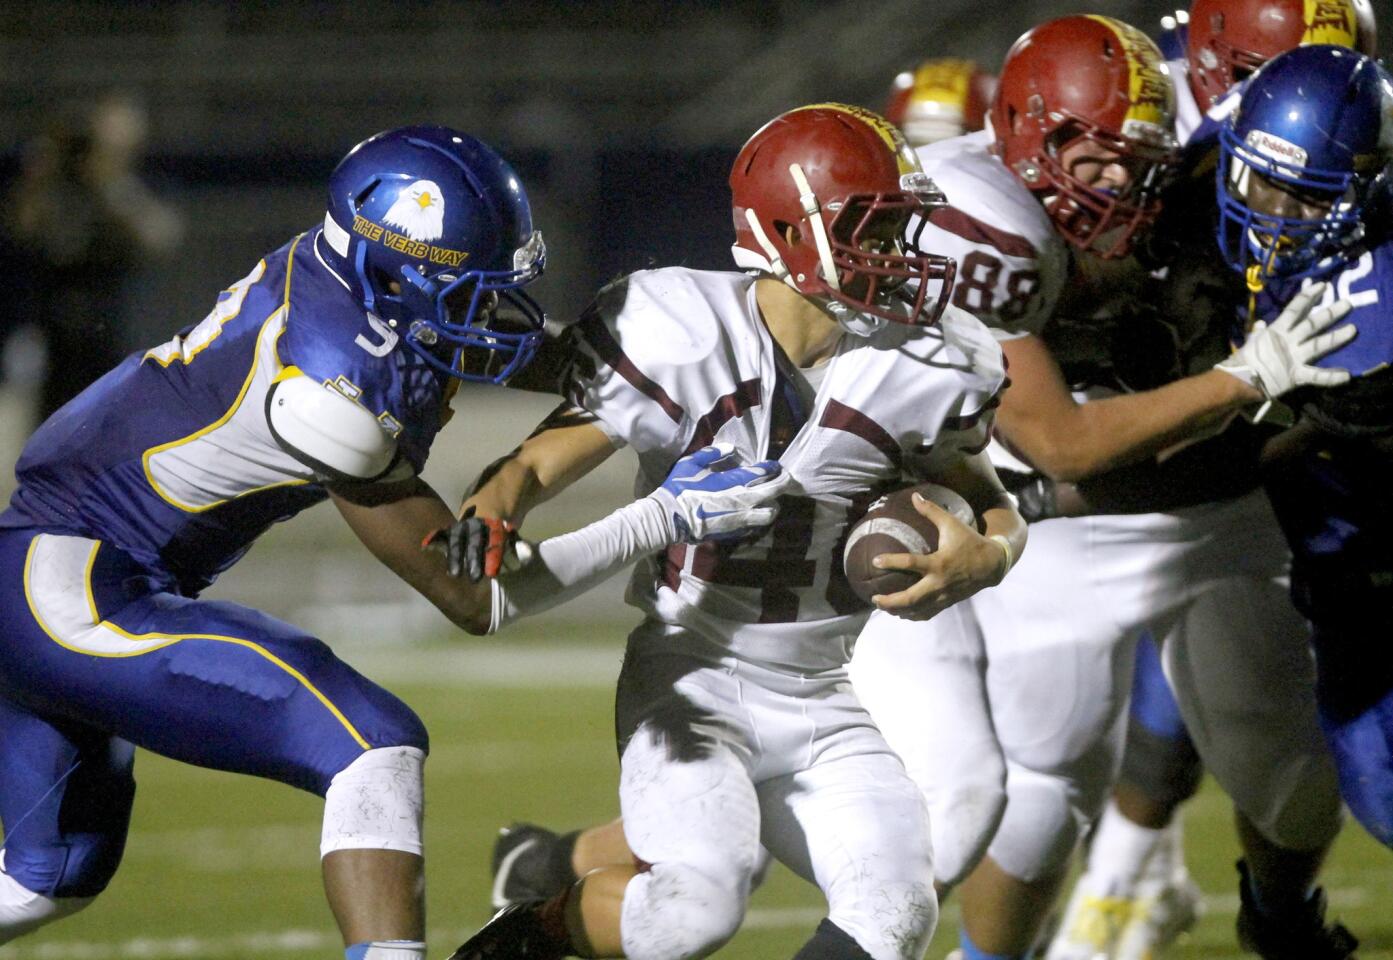 La Canada High School's #46 Ryan Breneman gets caught from behind by a Verbum Dei High School player during game at Los Angeles Southwest College in Los Angeles on Friday, Aug. 29, 2014.